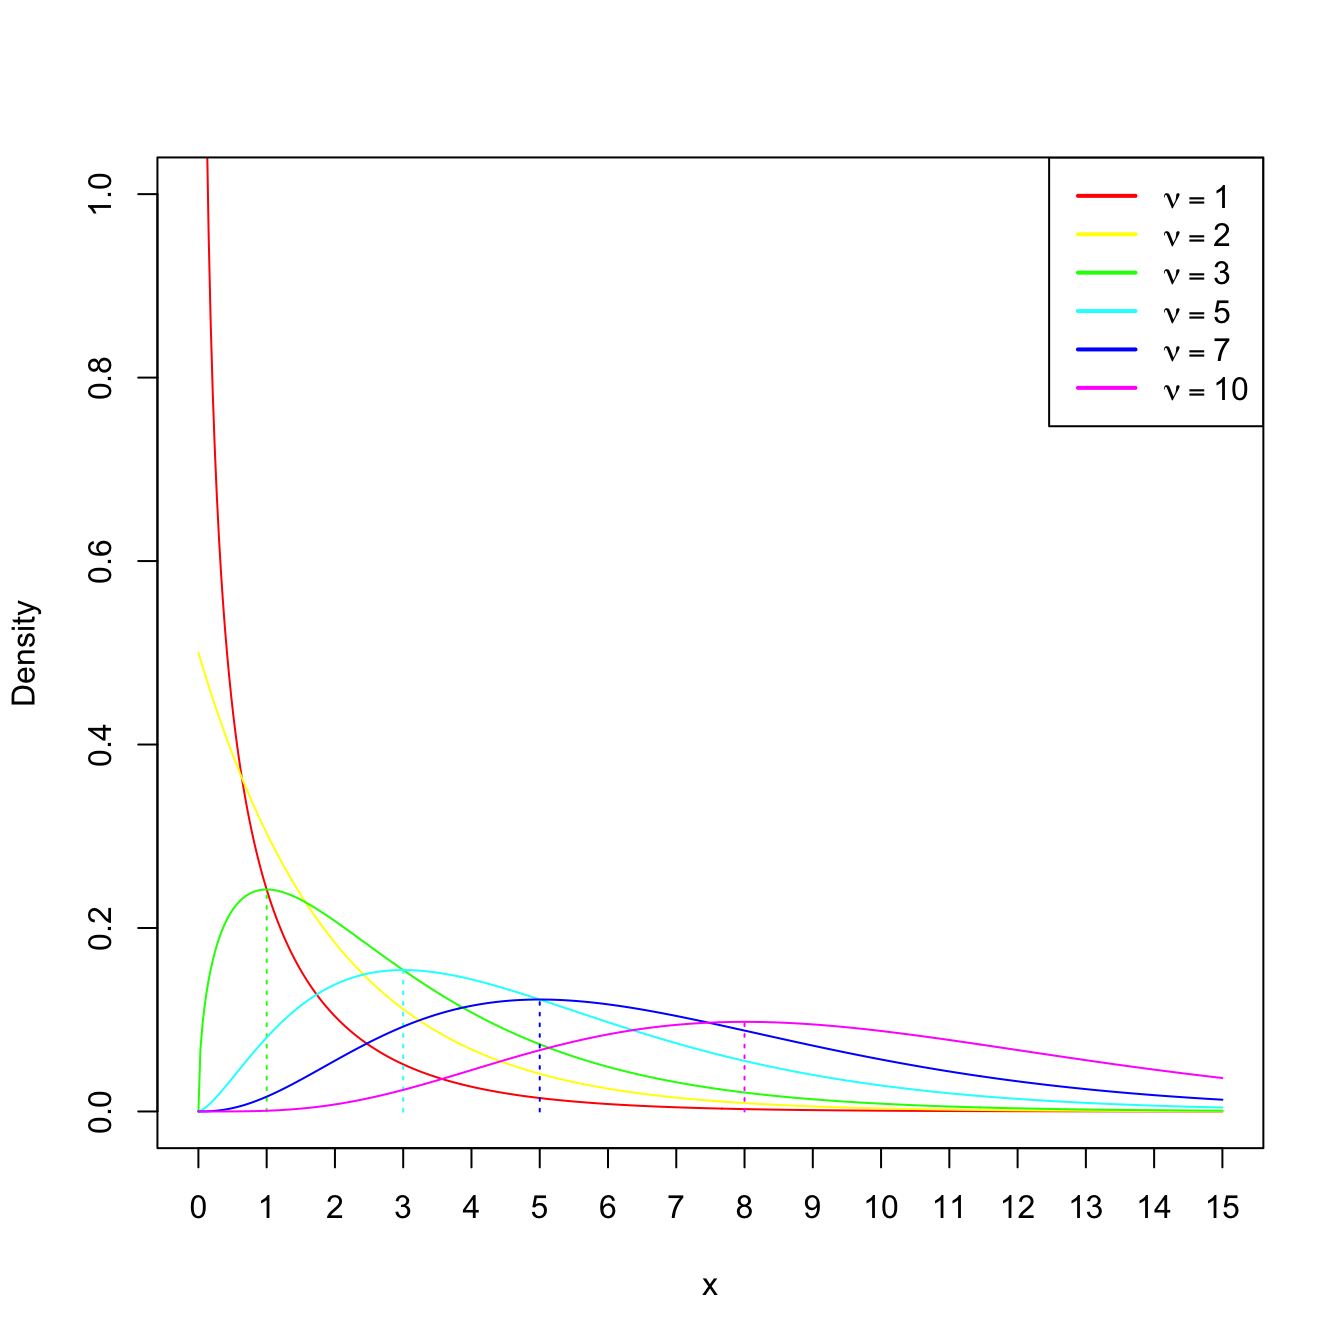 \(\chi^2_\nu\) densities for several degrees of freedom \(\nu\). The dotted lines represent the global maxima of the densities.